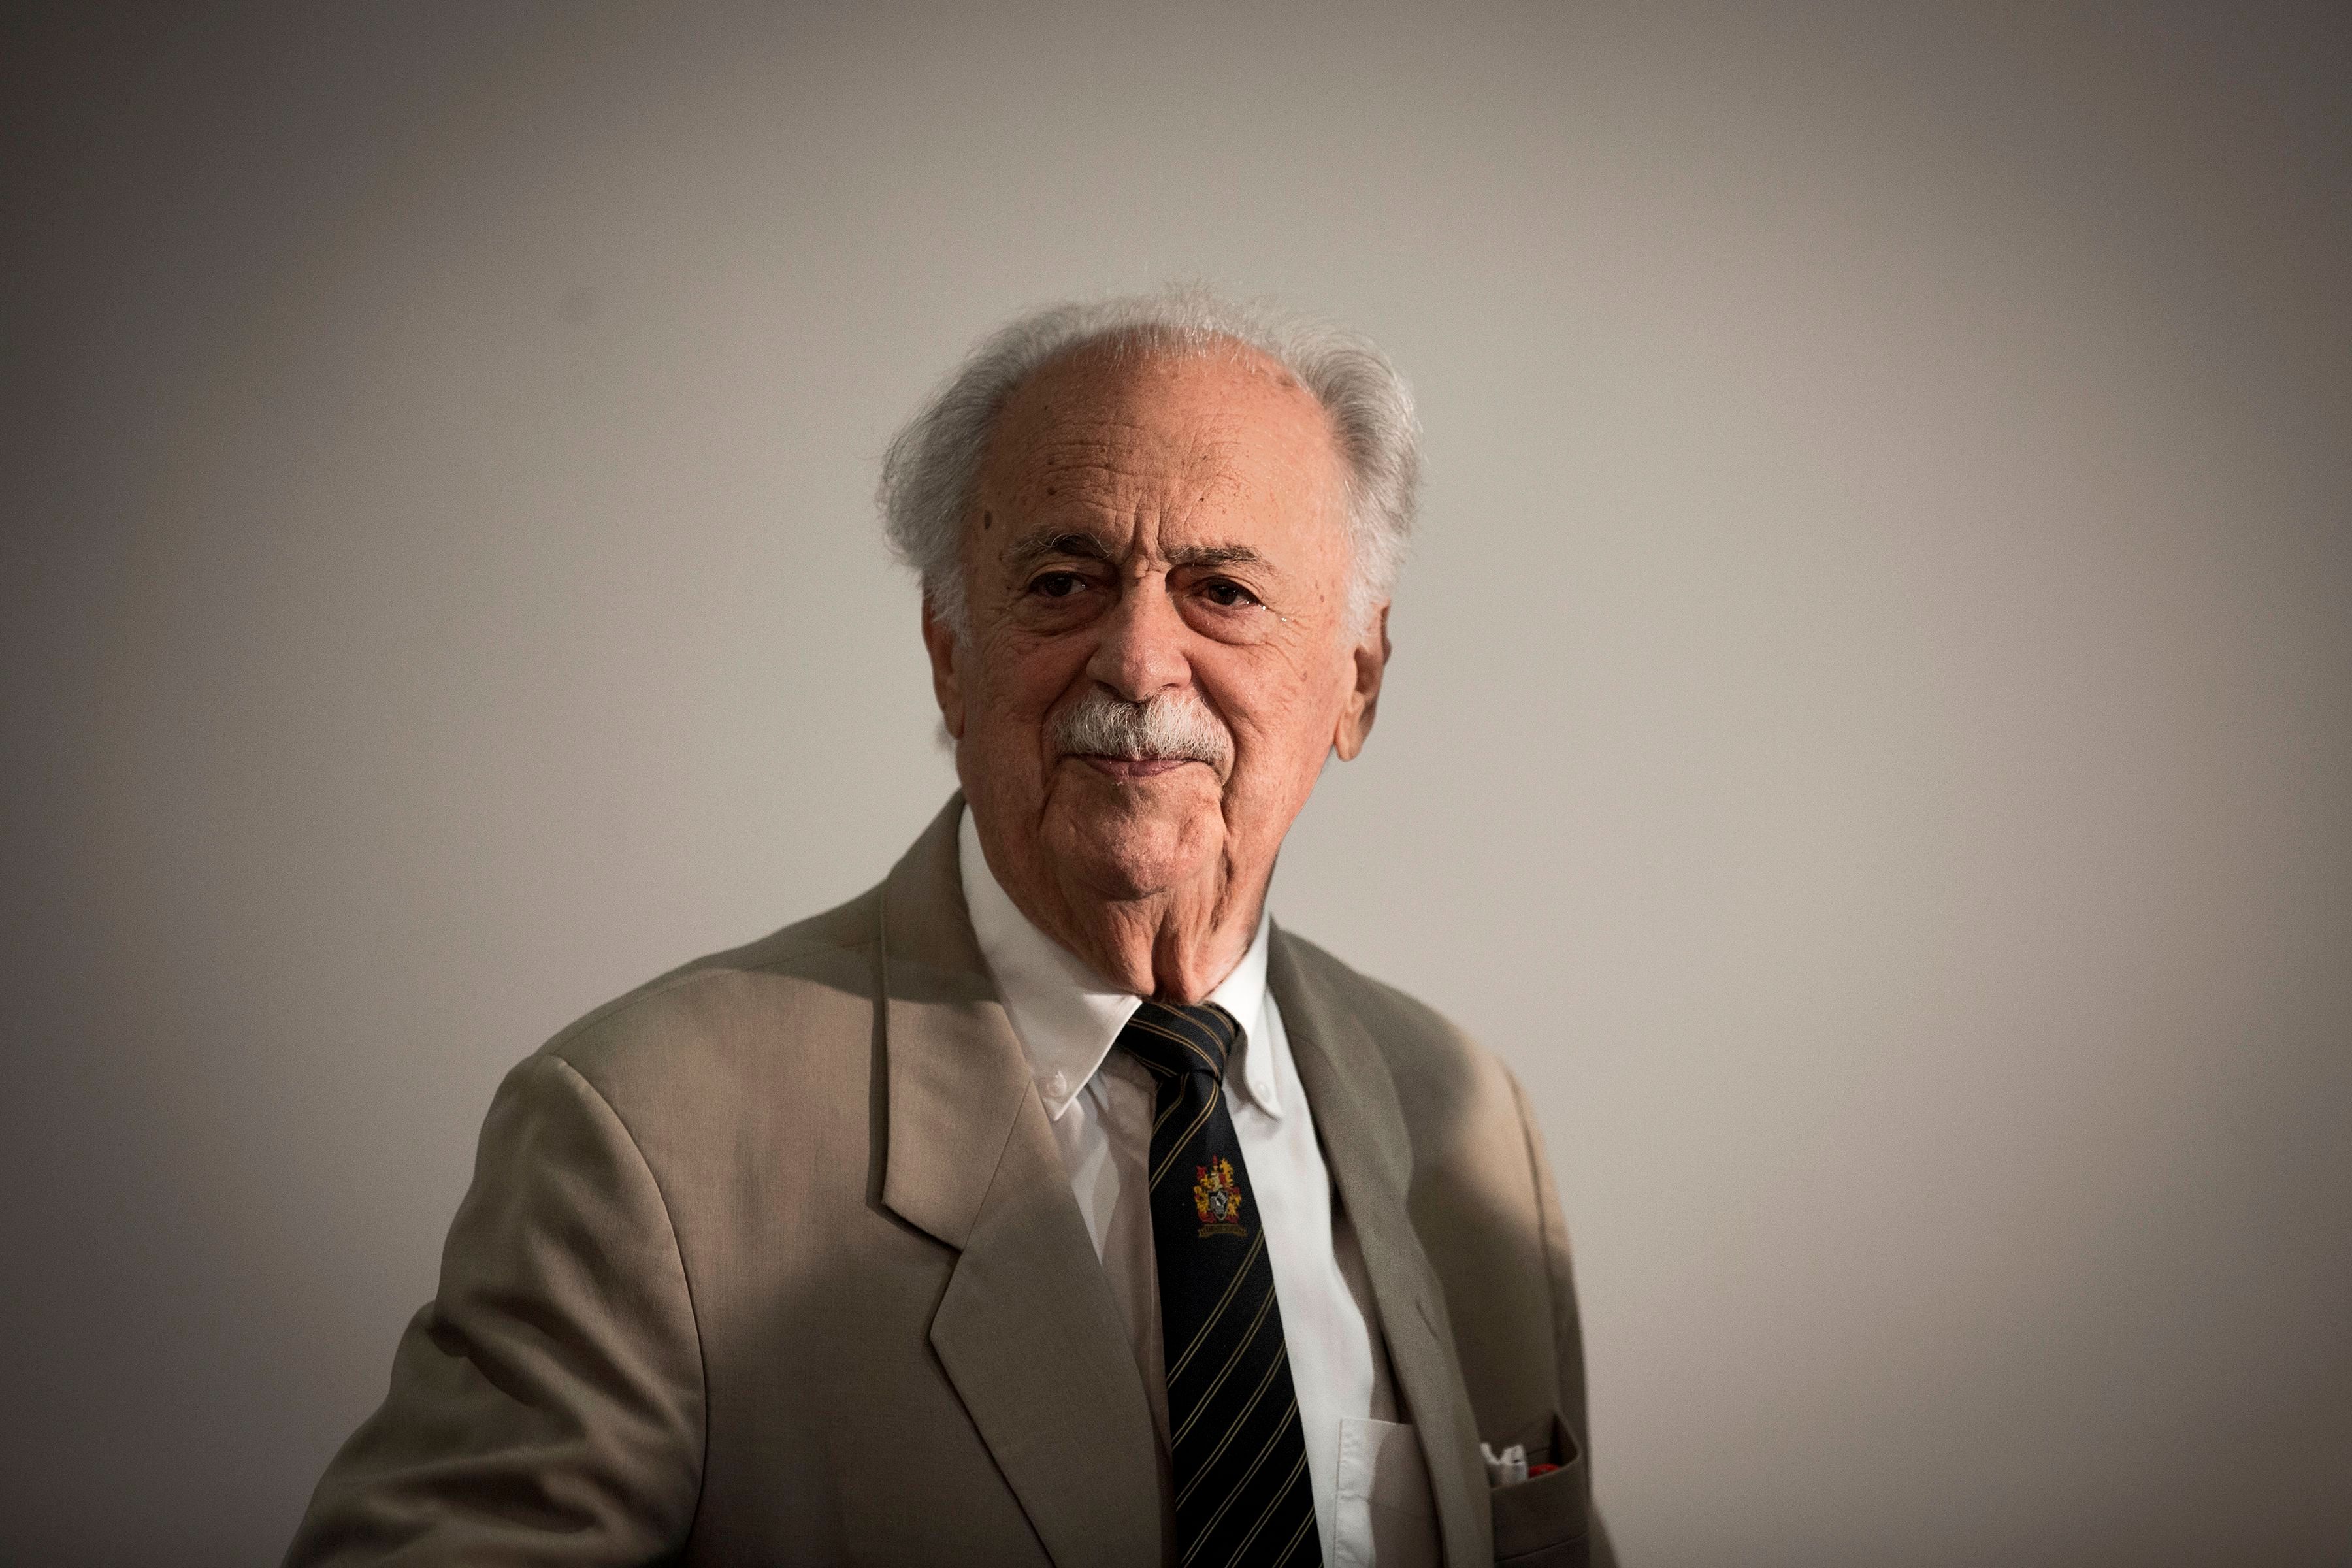 Former apartheid struggle stalwart and human rights lawyer George Bizos looks on at the inaugural George Bizos Human Rights Award in Johannesburg. Credit: AFP Photo